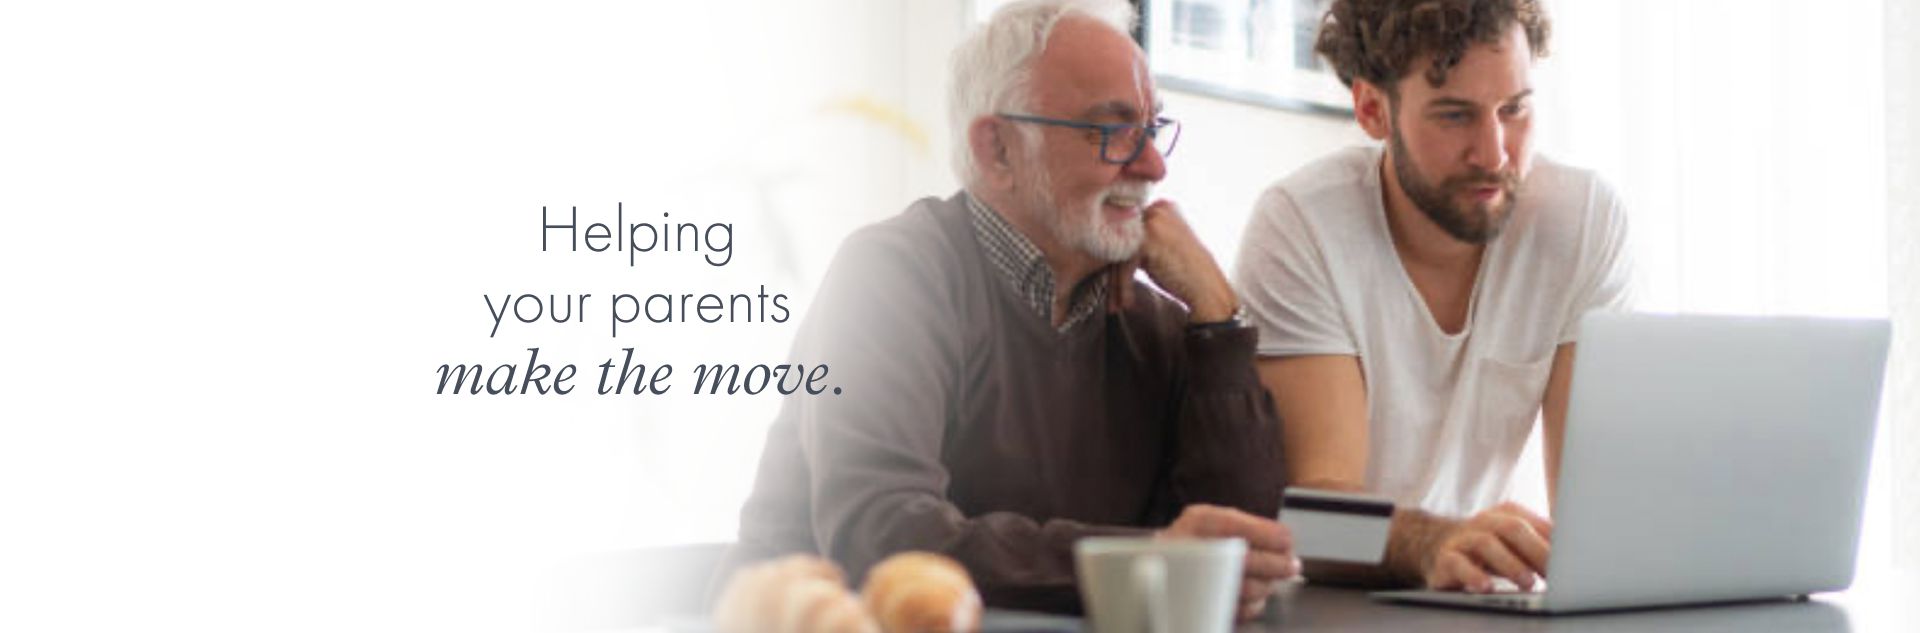 Helping your parents make the move.